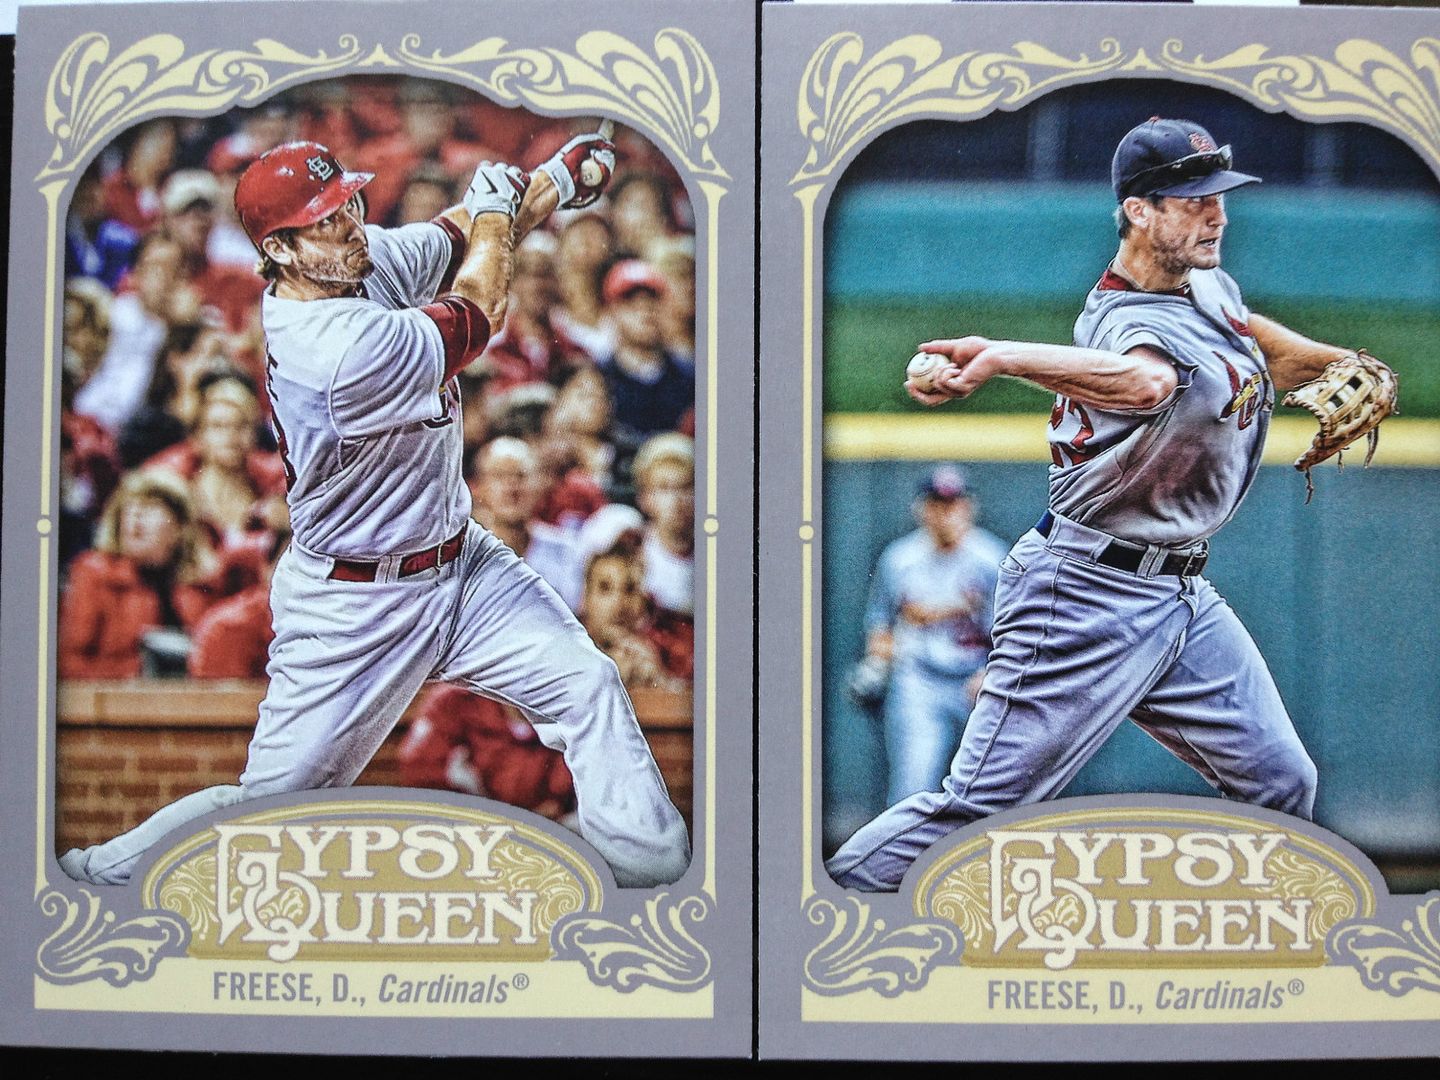 2012 Topps Gypsy Queen David Freese Base Card